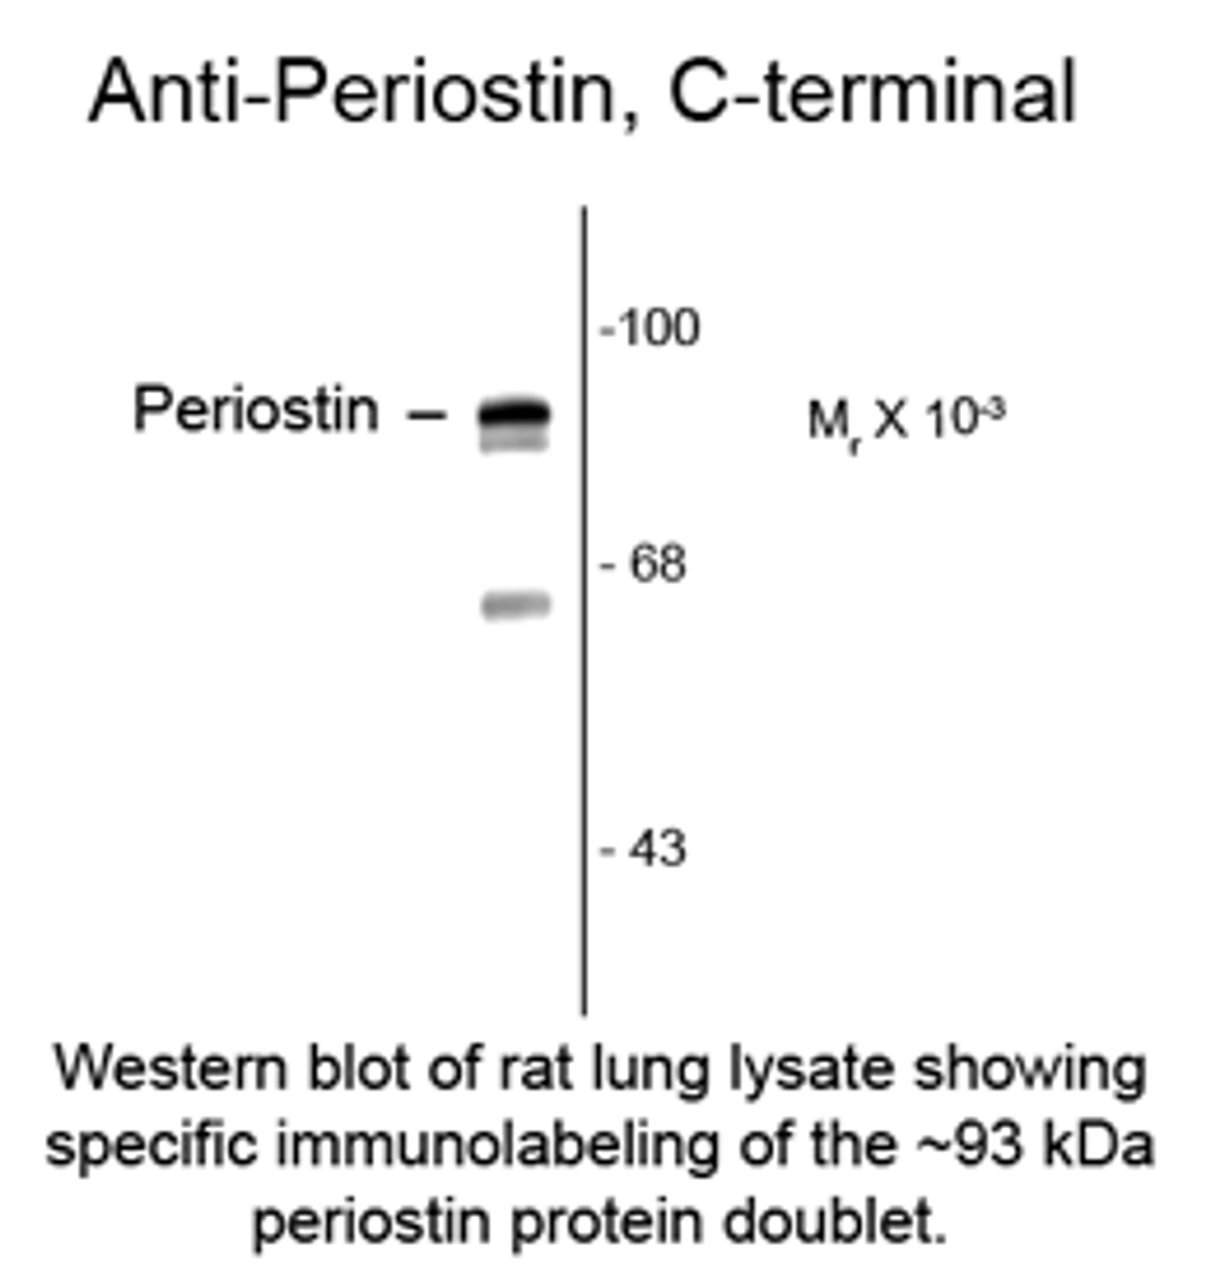 Western blot of rat lung lysate showing specific immnolabeling of the ~93 kDa periostin protein doublet.